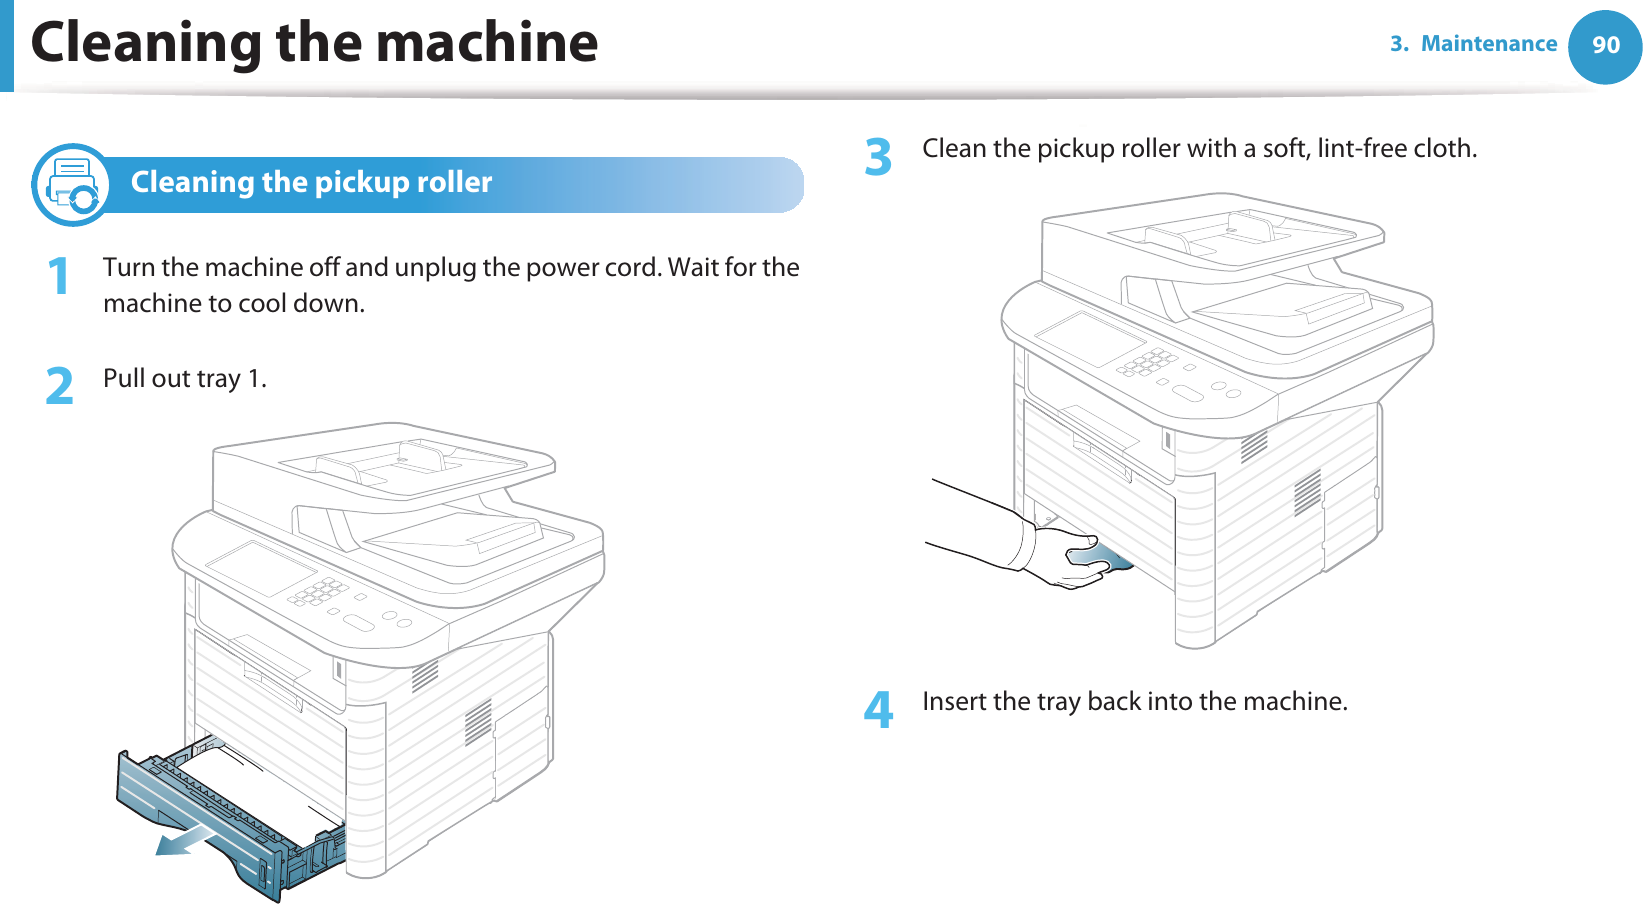 Cleaning the machine 903. Maintenance4 Cleaning the pickup roller1Turn the machine off and unplug the power cord. Wait for the machine to cool down.2  Pull out tray 1.3  Clean the pickup roller with a soft, lint-free cloth.4  Insert the tray back into the machine.